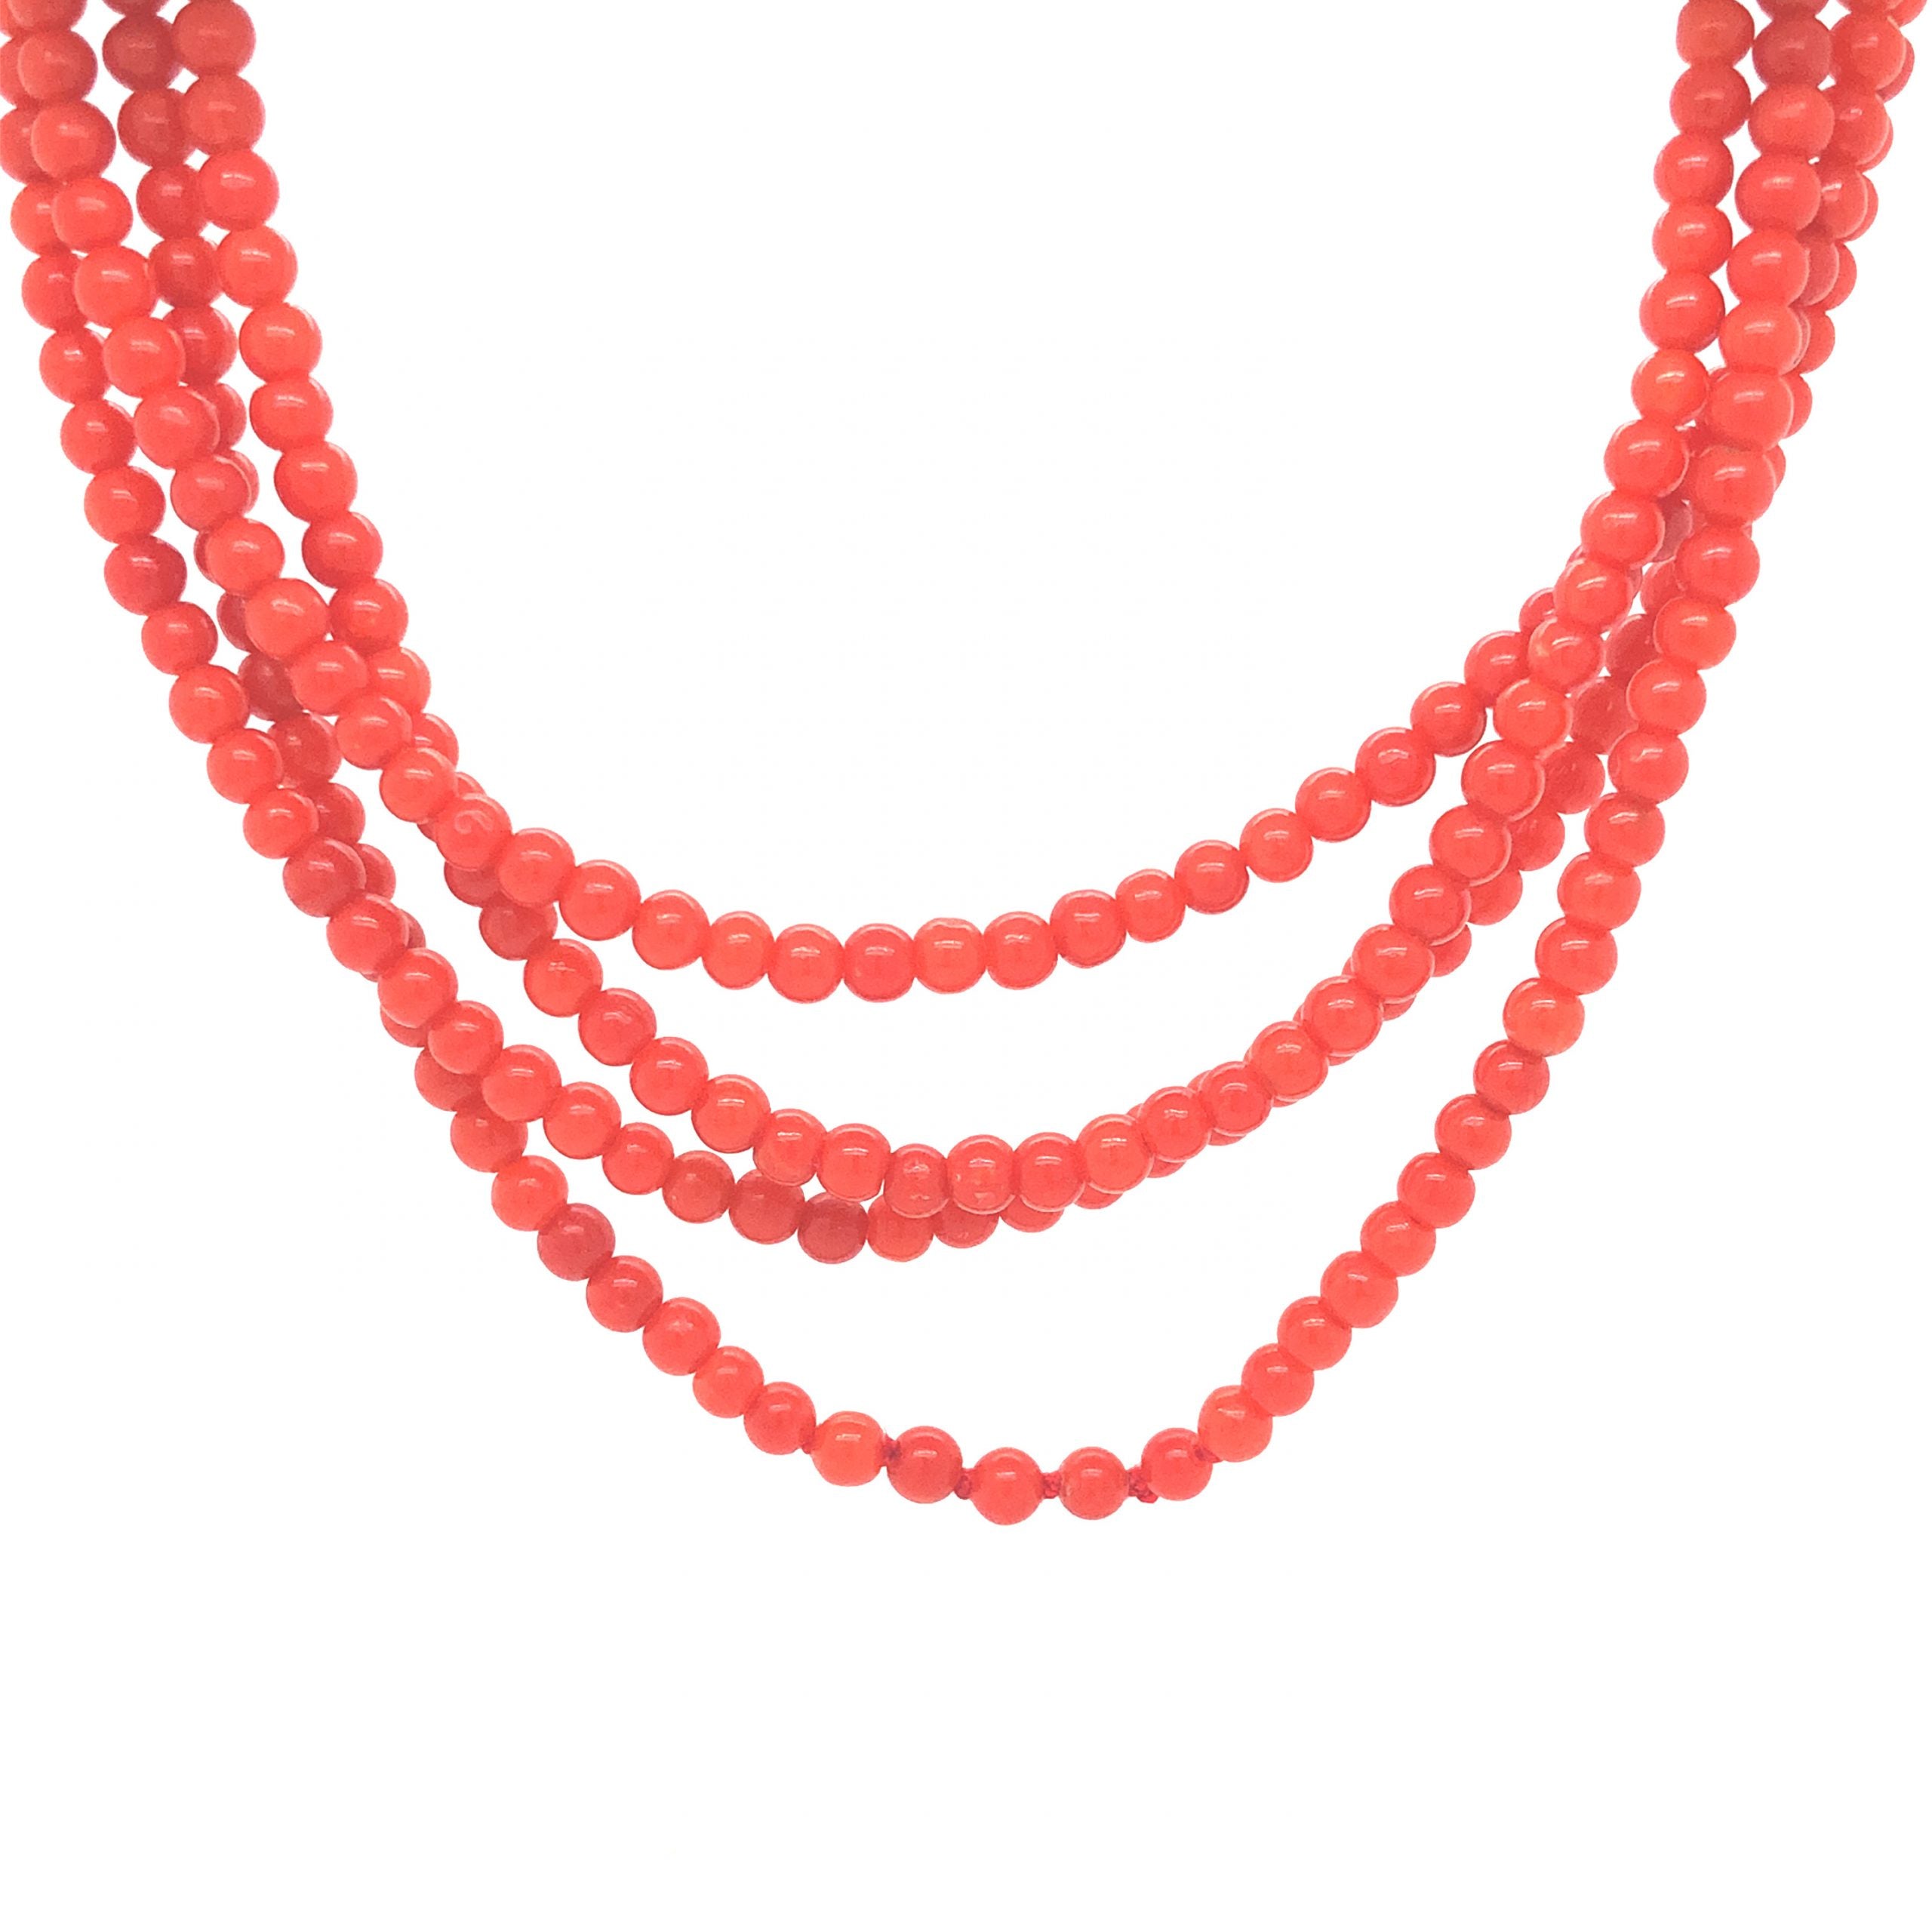 Nature's Masterpiece: High-Quality Italian Coral Necklaces